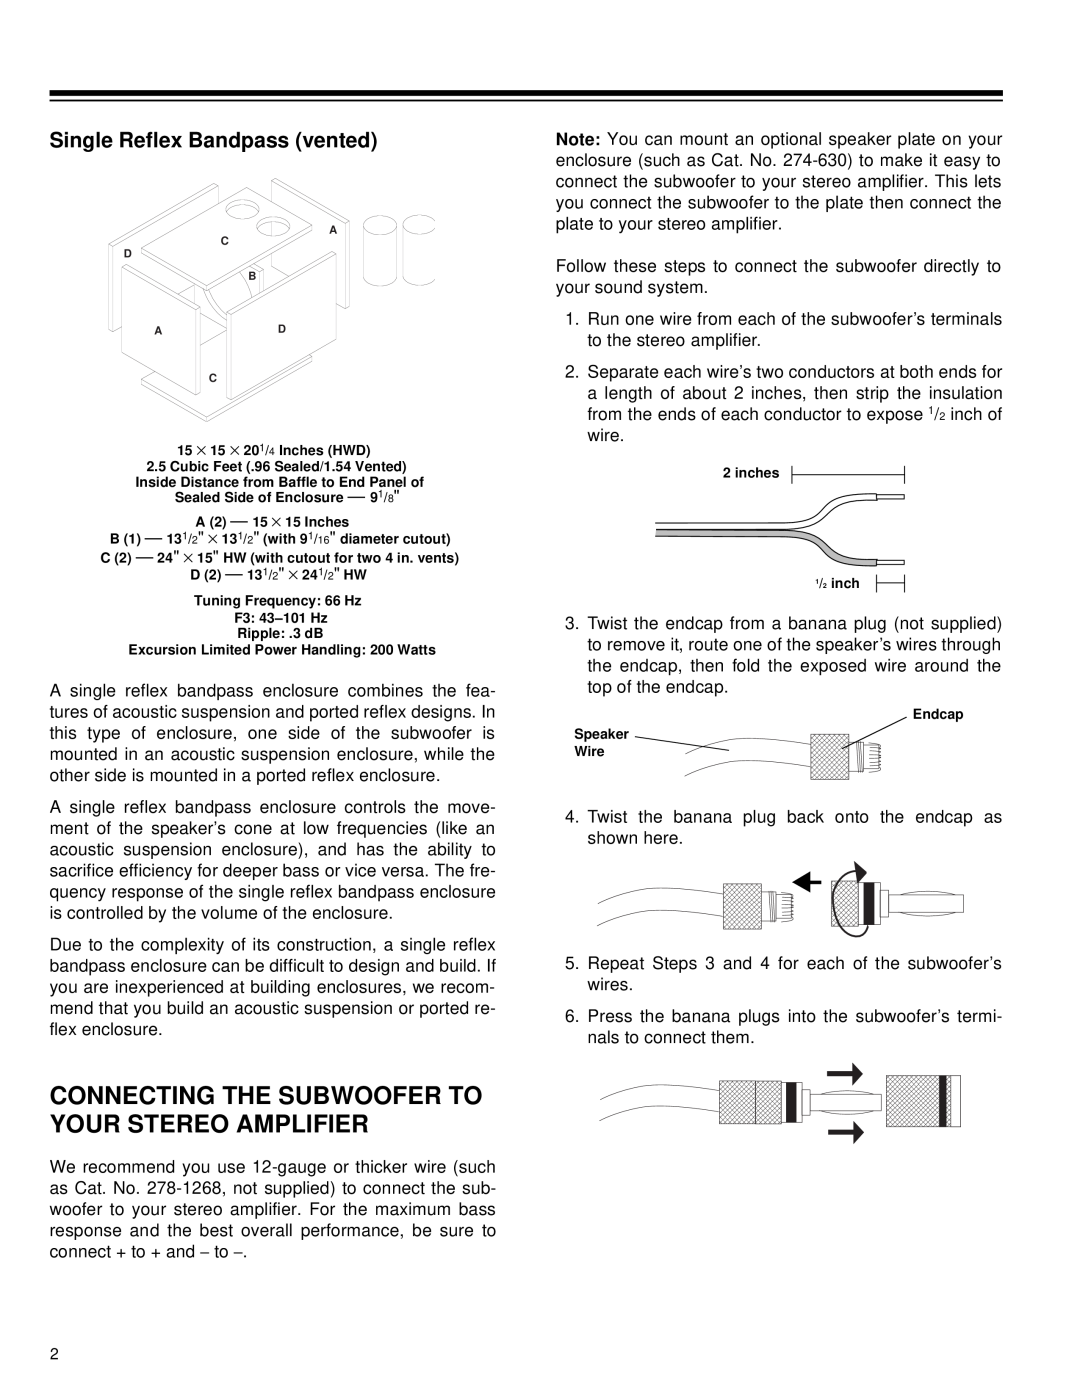 Radio Shack PRO-CSW1200 owner manual Connecting The Subwoofer To Your Stereo Amplifier, Single Reflex Bandpass vented 